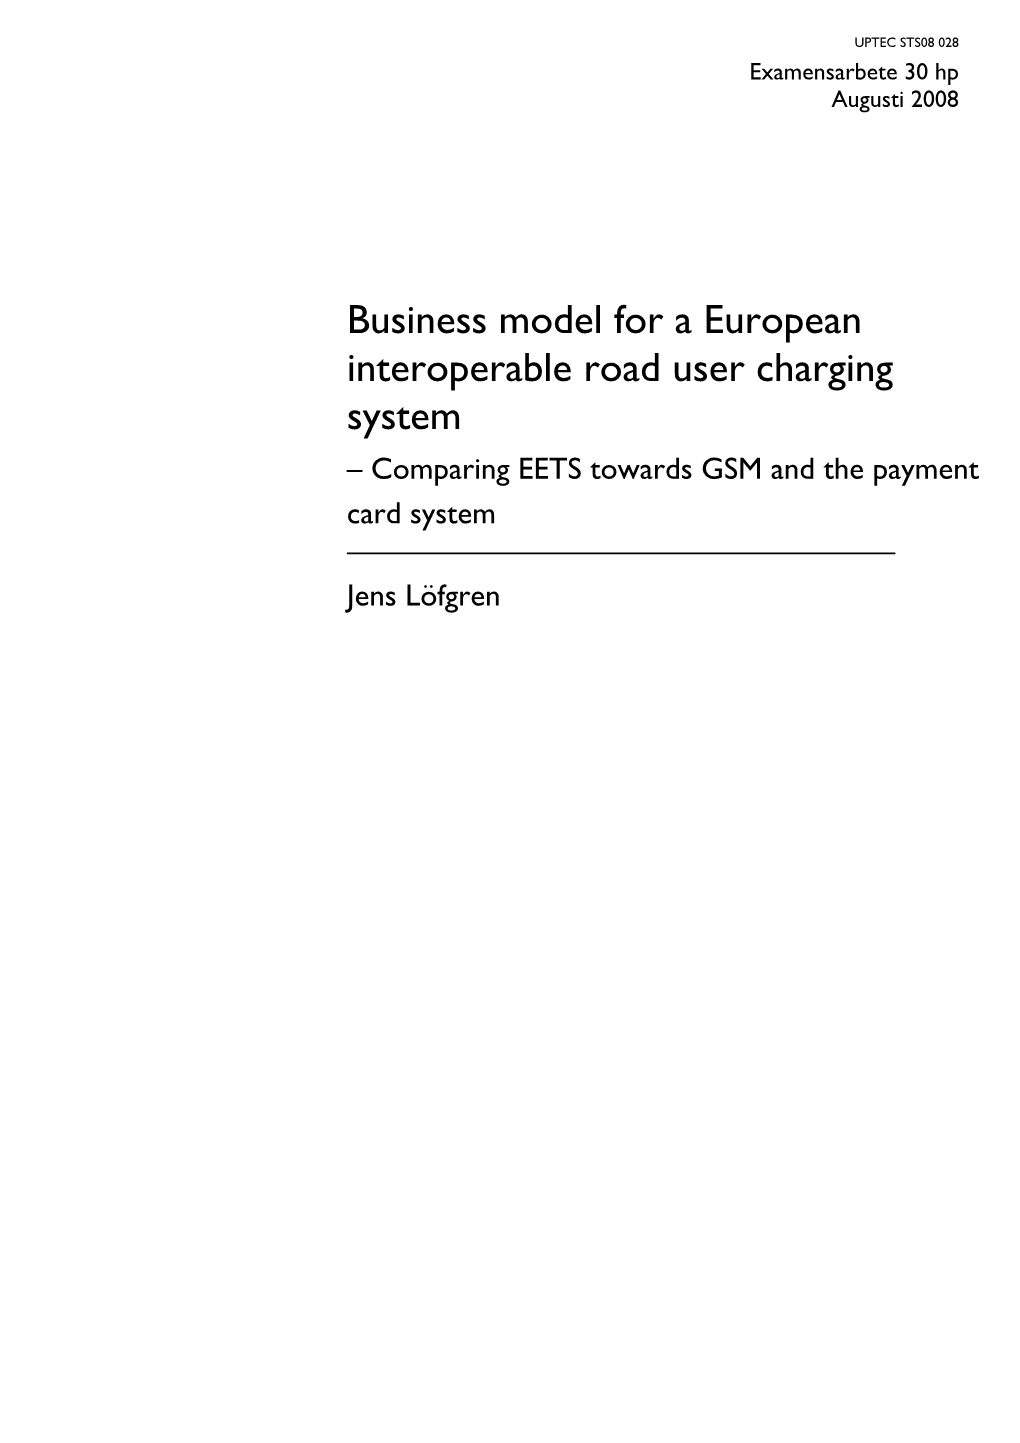 Business Model for a European Interoperable Road User Charging System – Comparing EETS Towards GSM and the Payment Card System